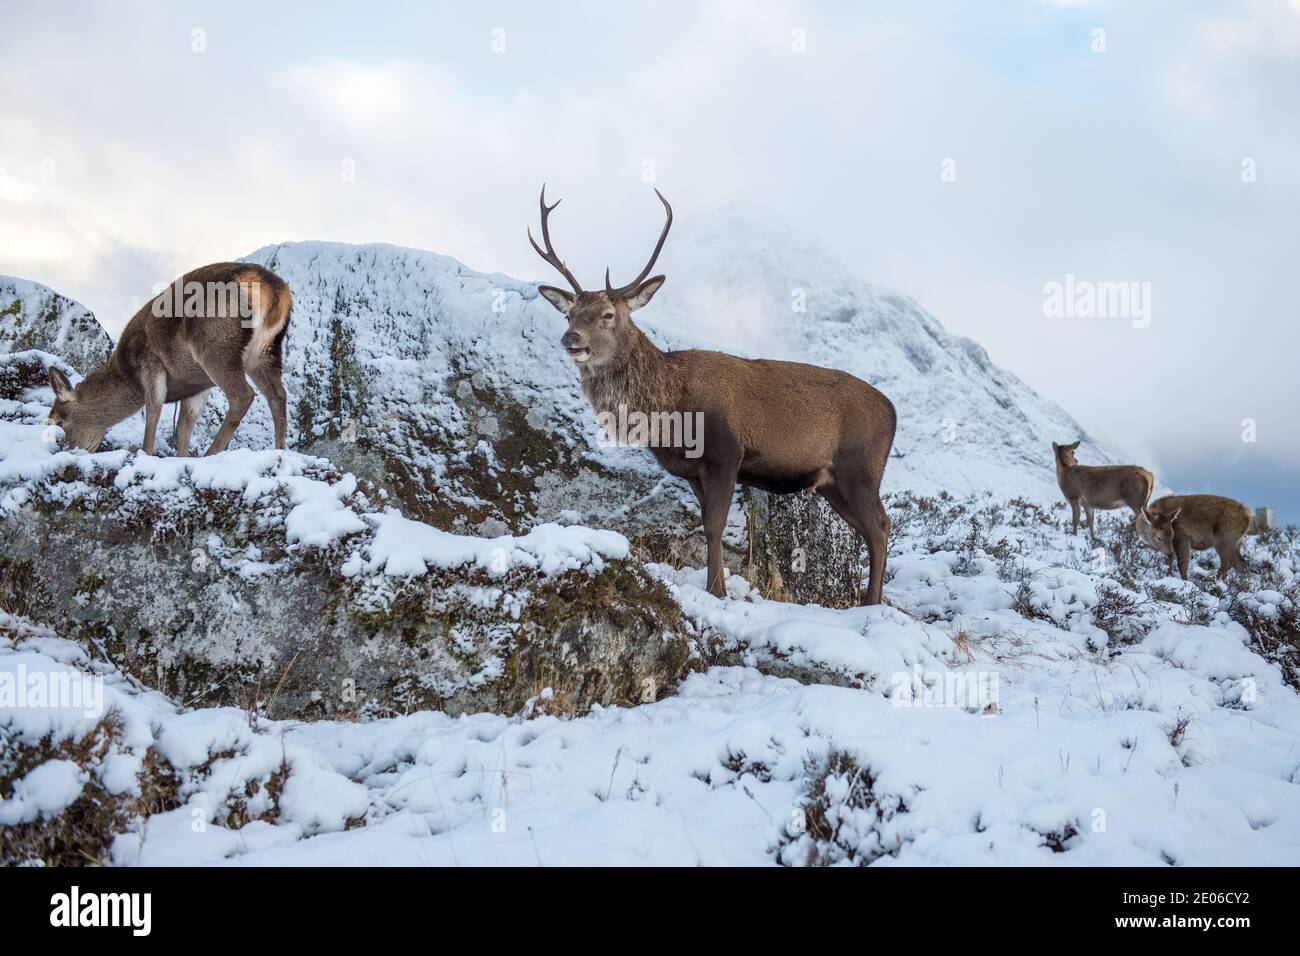 Glencoe, Scotland, UK. 30th Dec, 2020. Pictured: Stag in Glencoe with the famous mountain Buachaille Etive Mòr as a backdrop. Since Scotland was put into phase 4 lockdown, people have been coming out to feed the deer which roam wild in the glen, tempting the herd of deer down from the higher ground. Credit: Colin Fisher/Alamy Live News Stock Photo